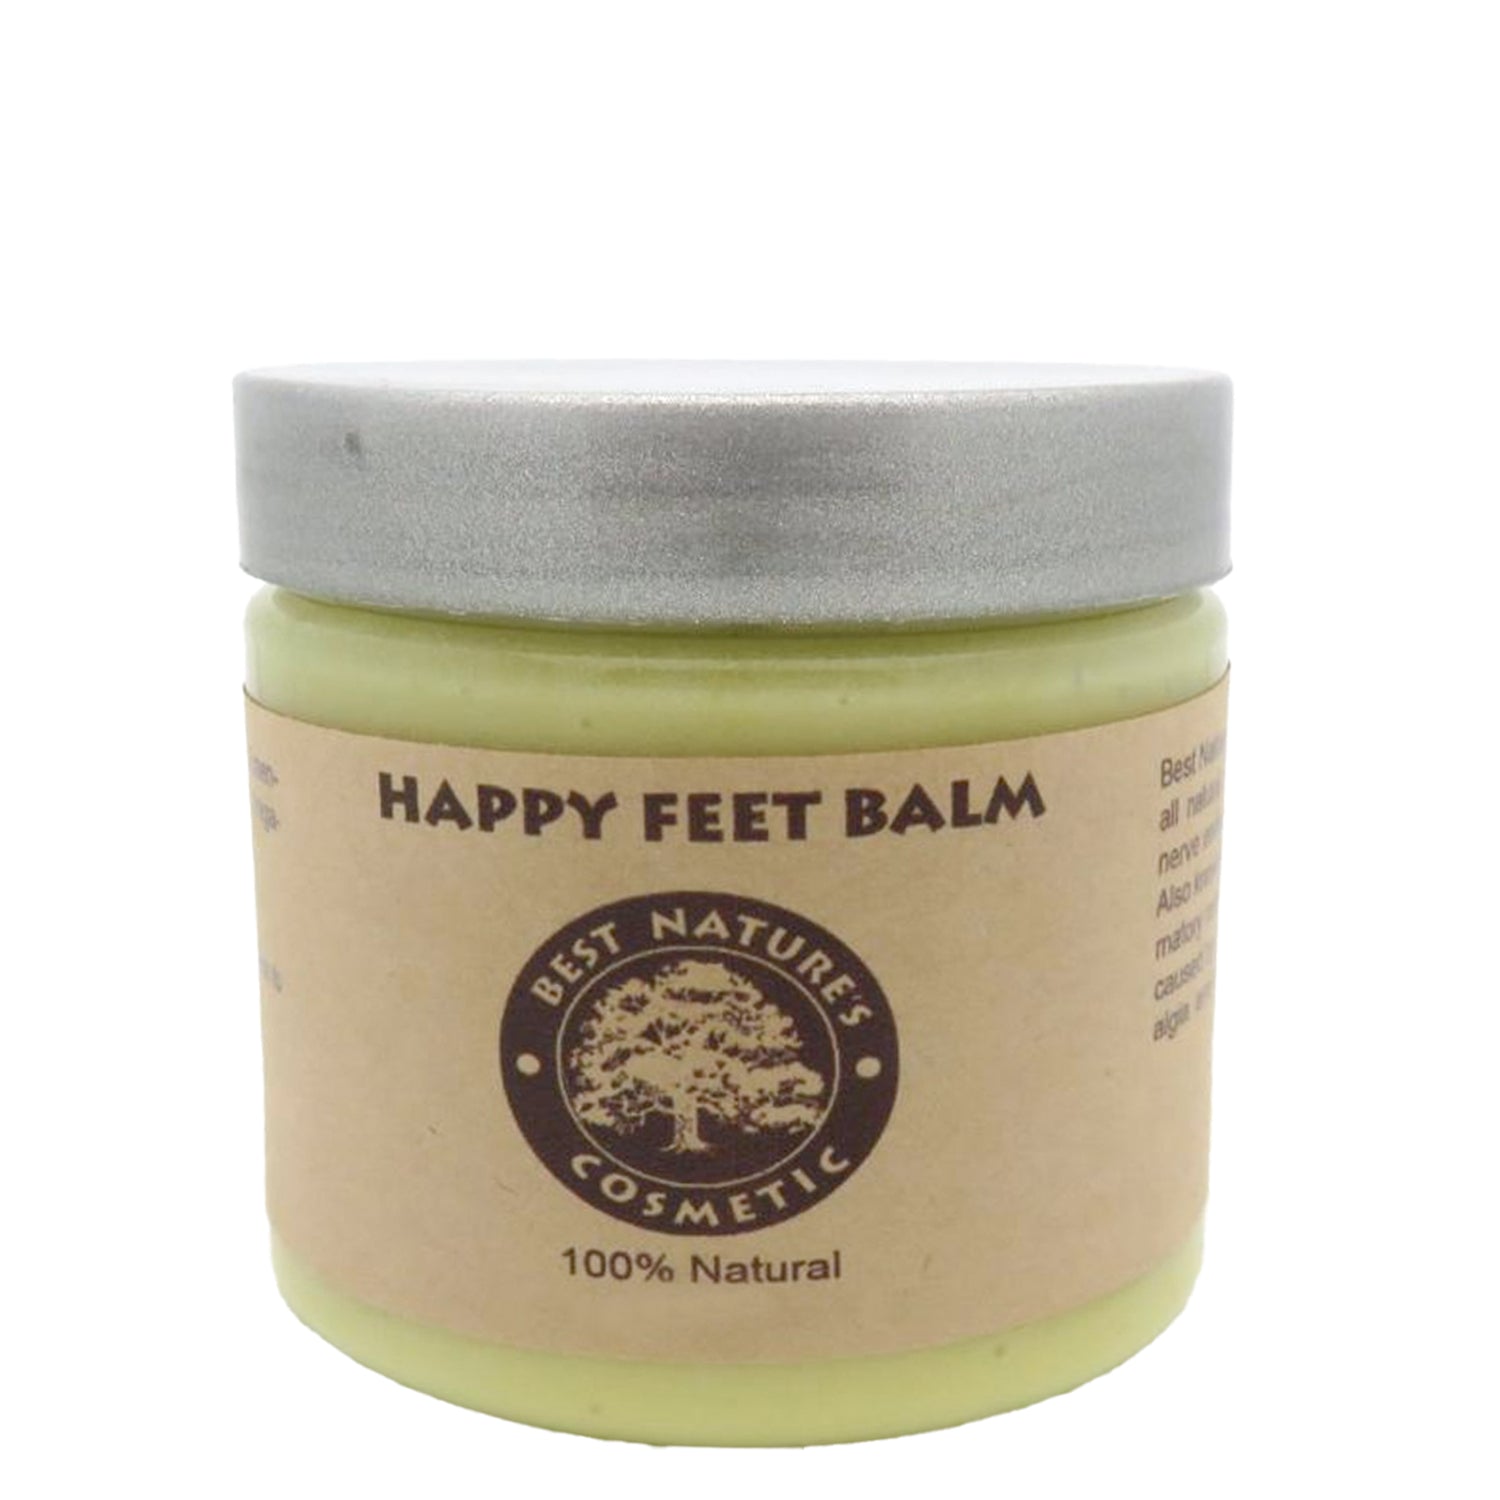 Happy Feet Balm - to cool down pain, reduce burning, gives relaxing uplifted feel to your skin. 5oz / 150 ml